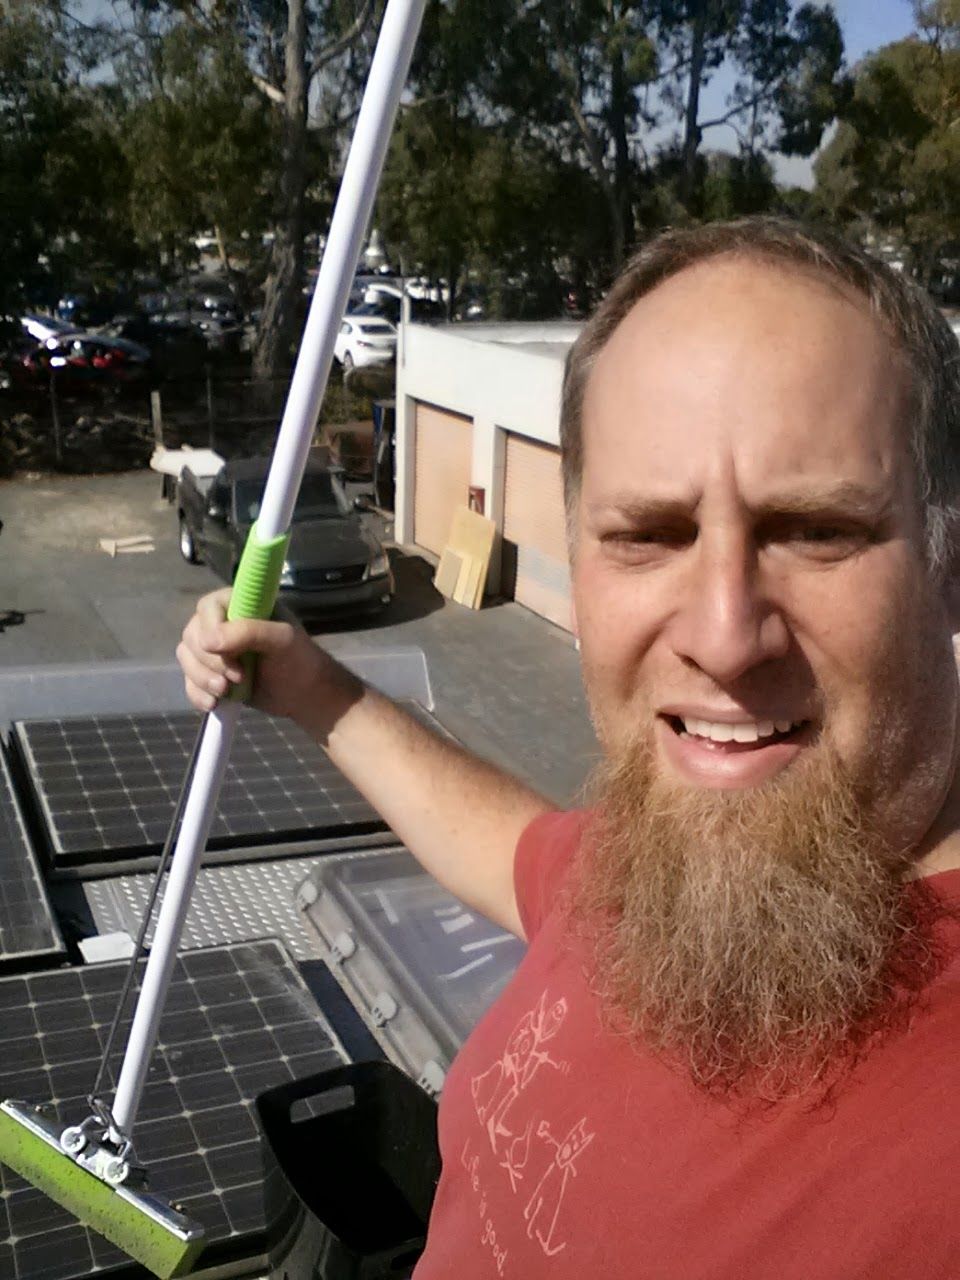 Jay with a mop and solar panels